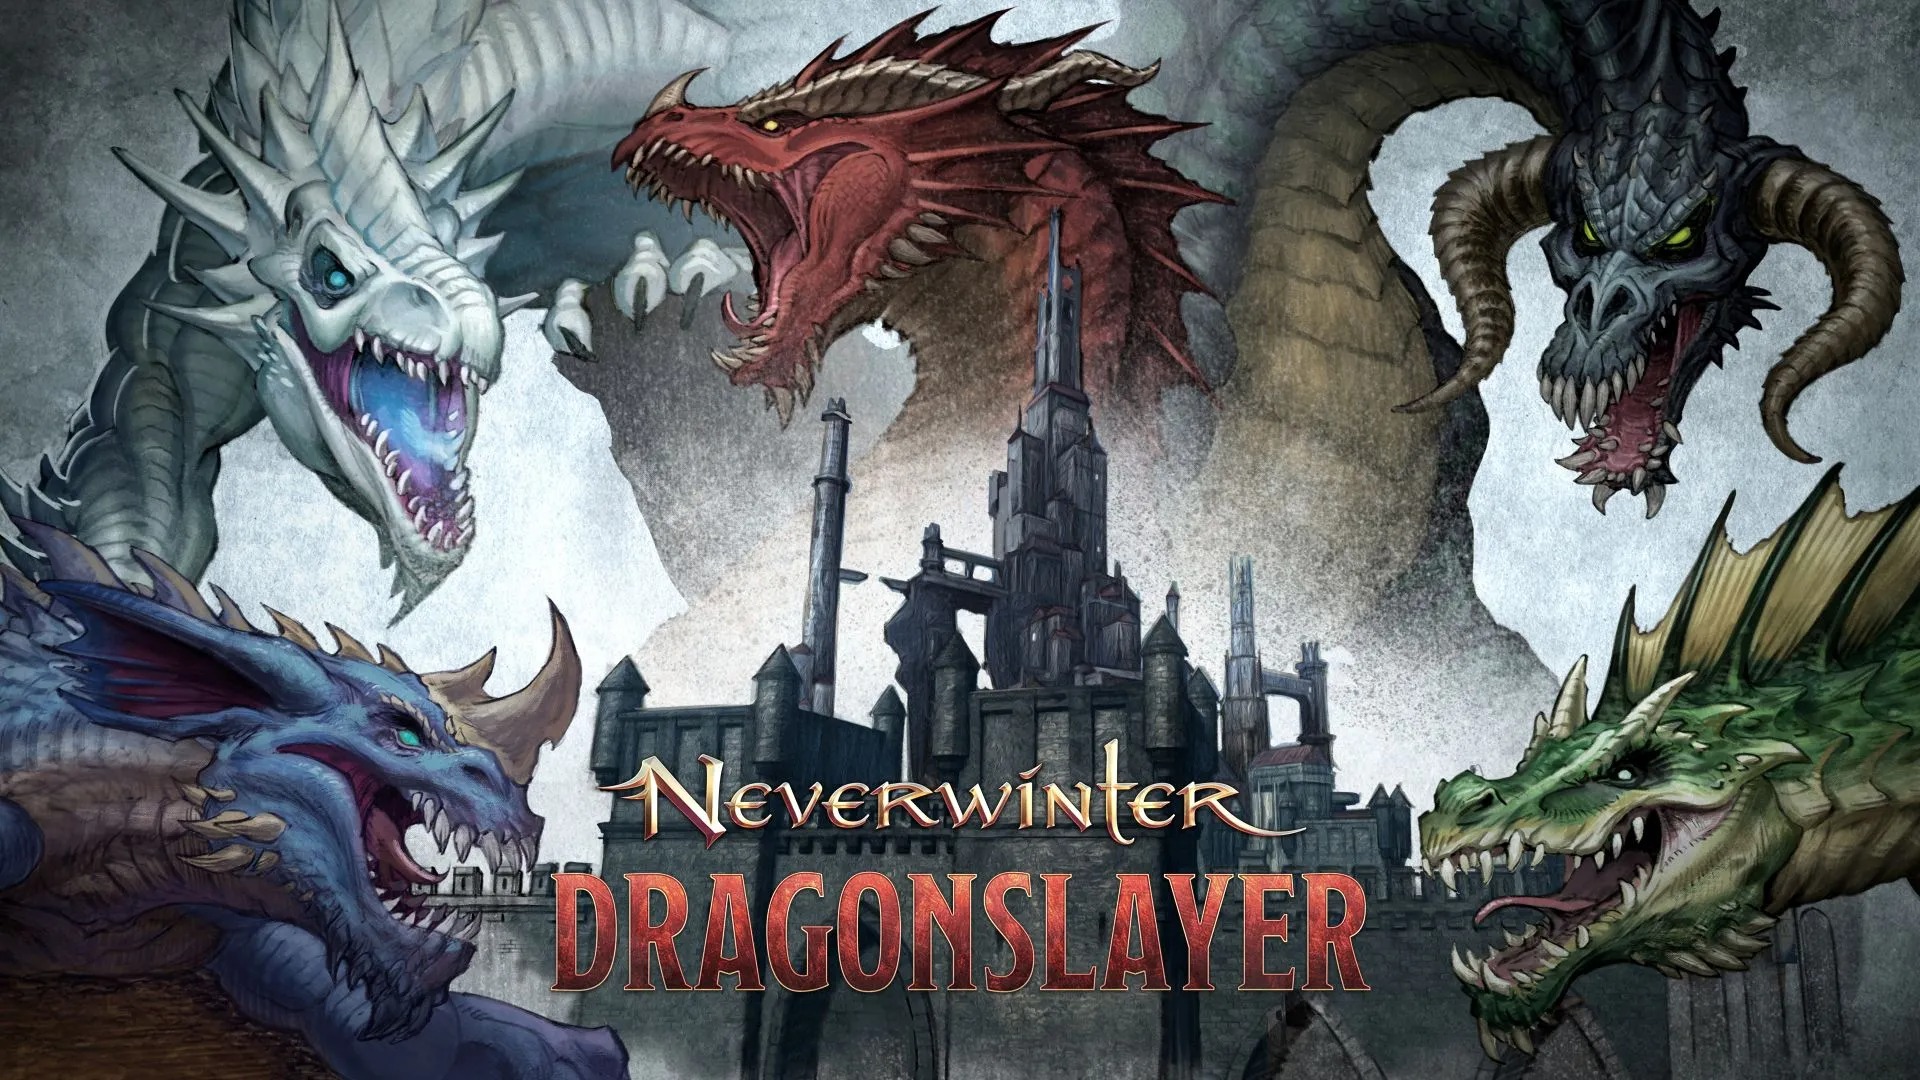 Video For Neverwinter: Dragonslayer rugit sur Xbox